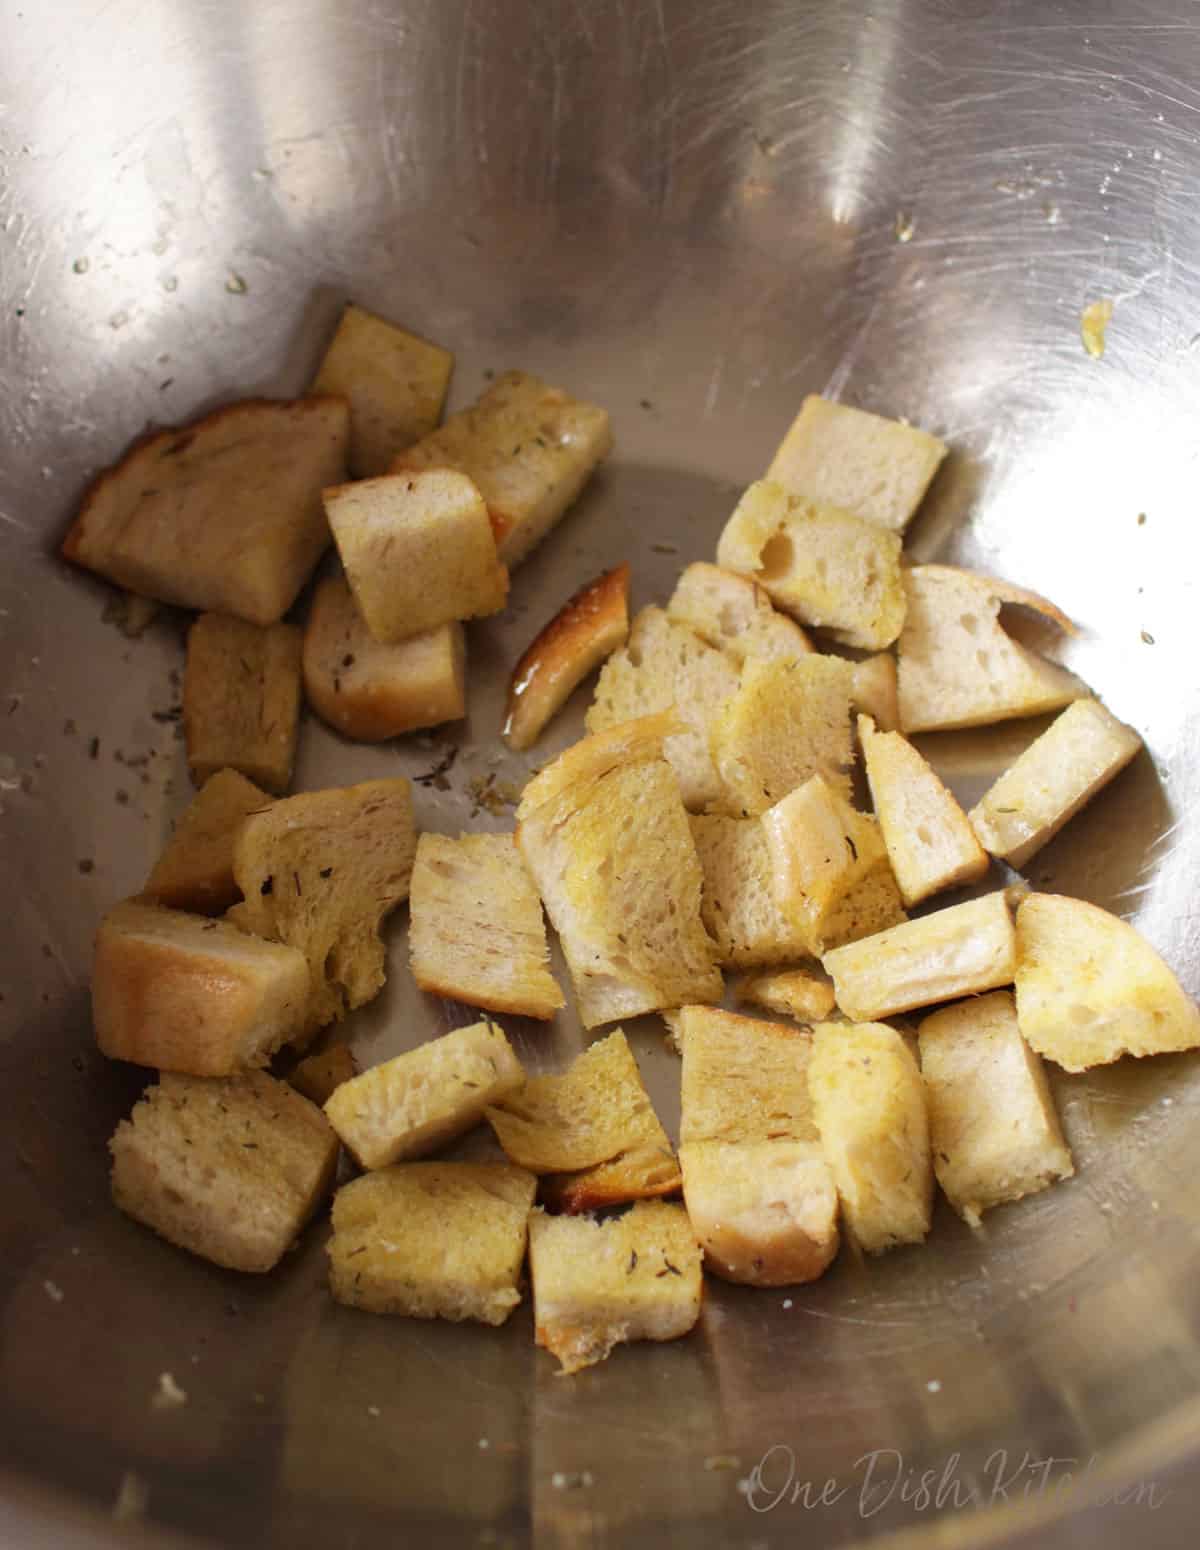 Croutons in a bowl topped with olive oil, salt, and herbs